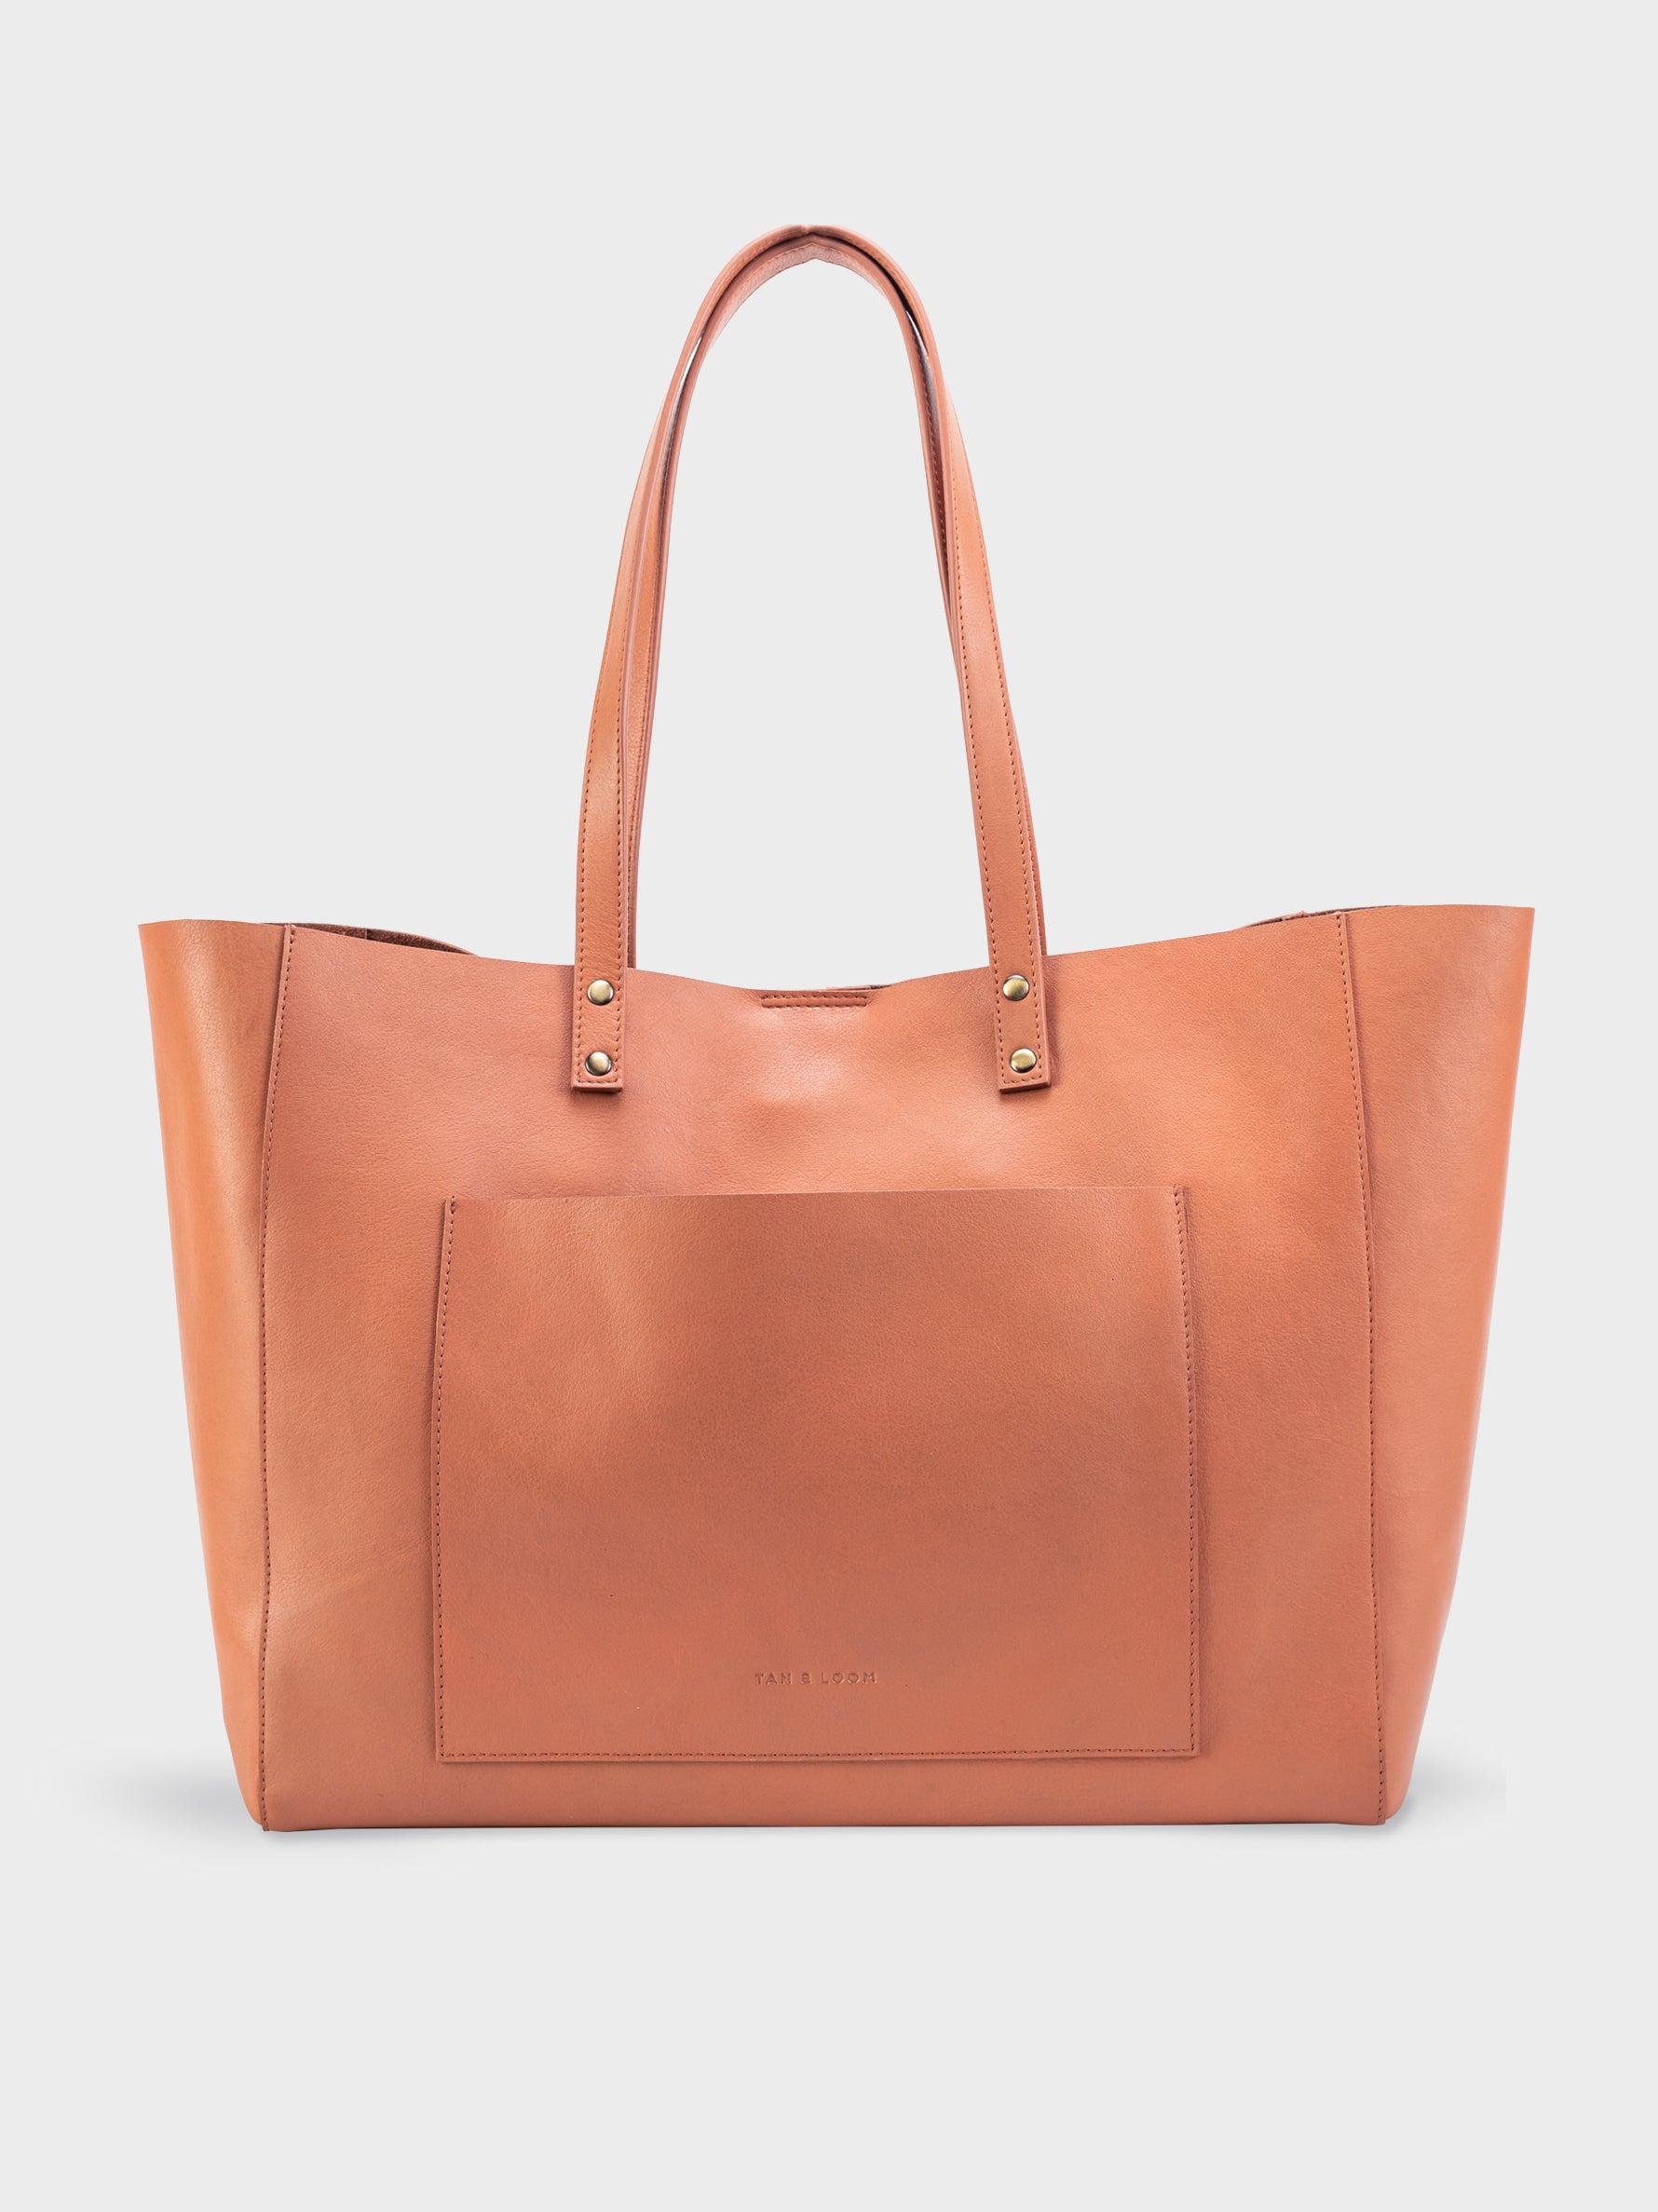 Handcrafted Genuine Vegetable Tanned Leather Old Fashioned Tote Large Dusty Peach for Women Tan & Loom